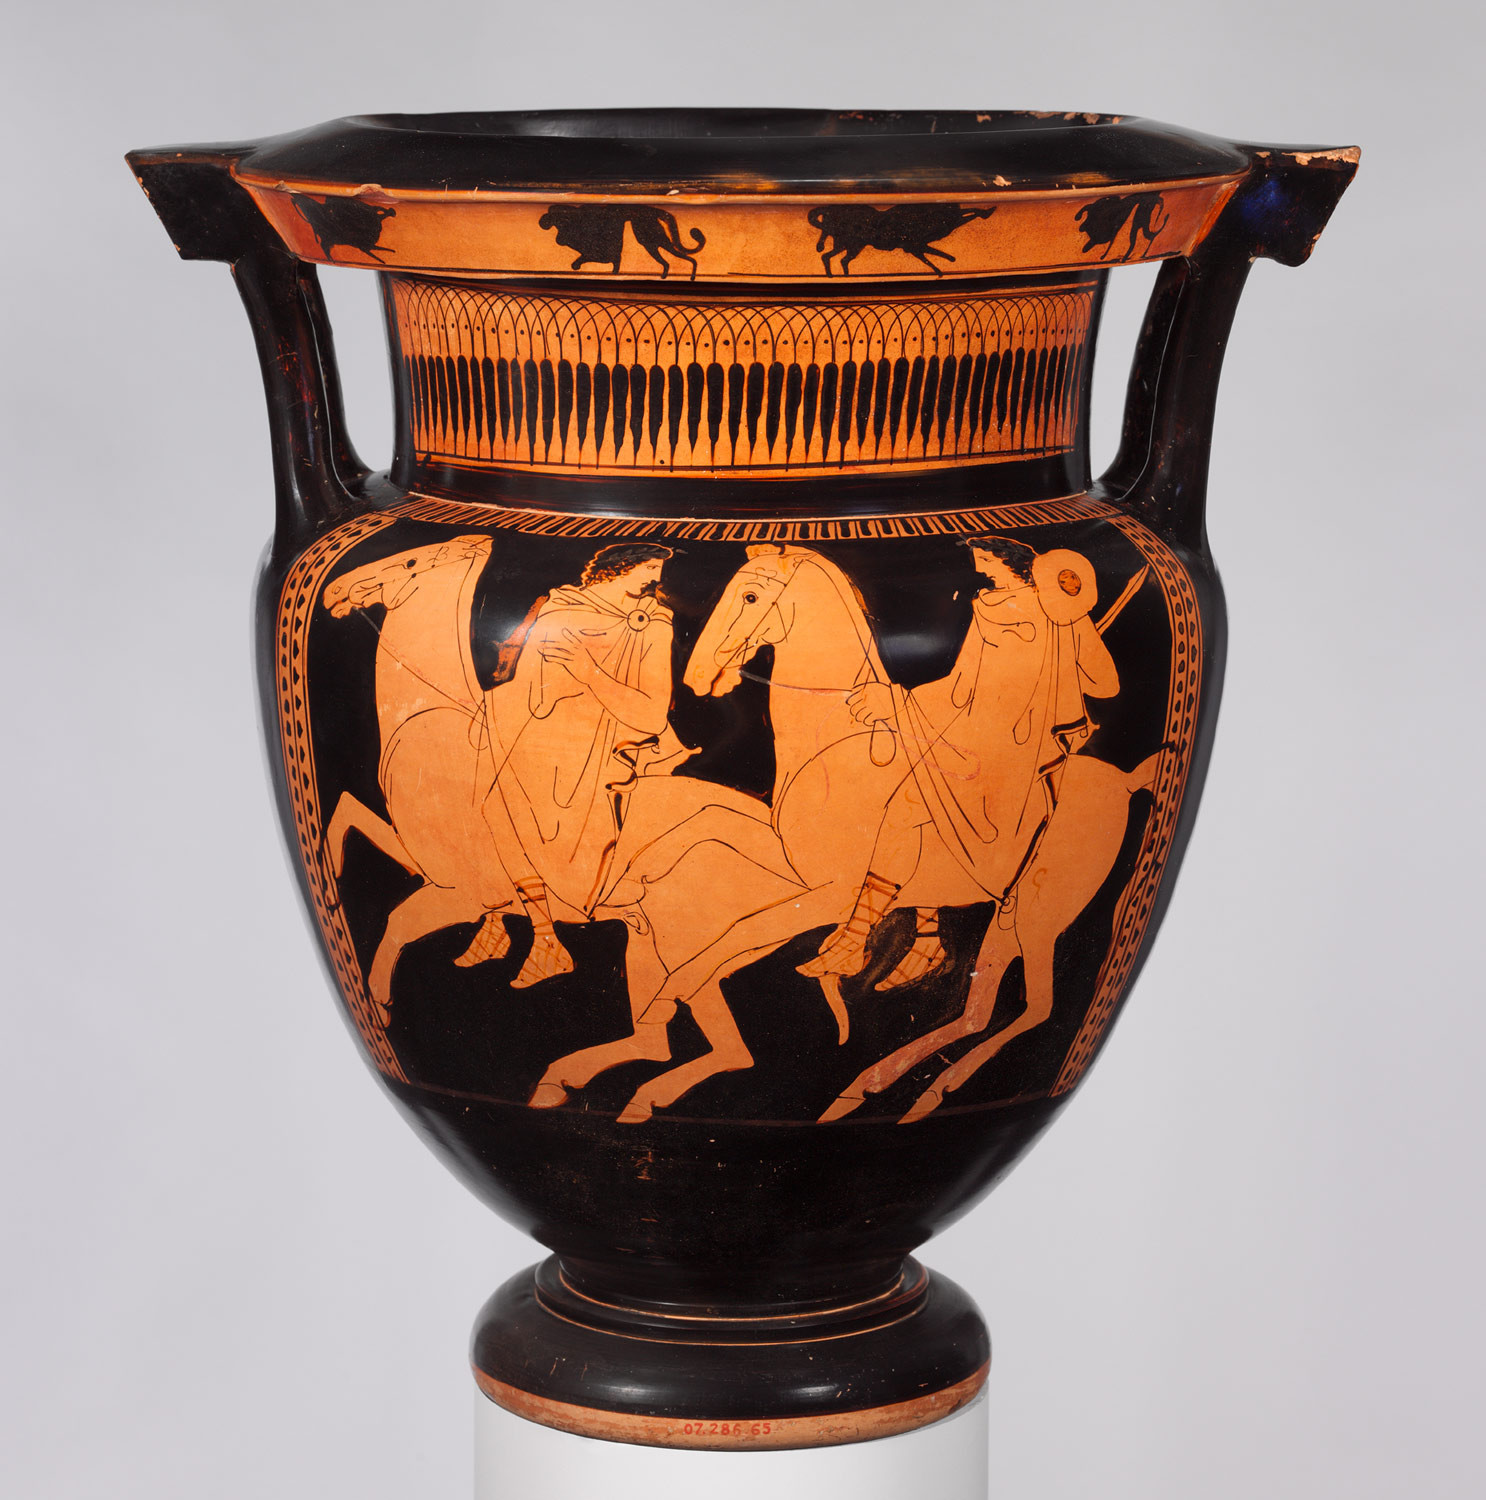 11 Trendy Unglazed White Ceramic Vase 2024 free download unglazed white ceramic vase of athenian vase painting black and red figure techniques essay within terracotta column krater bowl for mixing wine and water